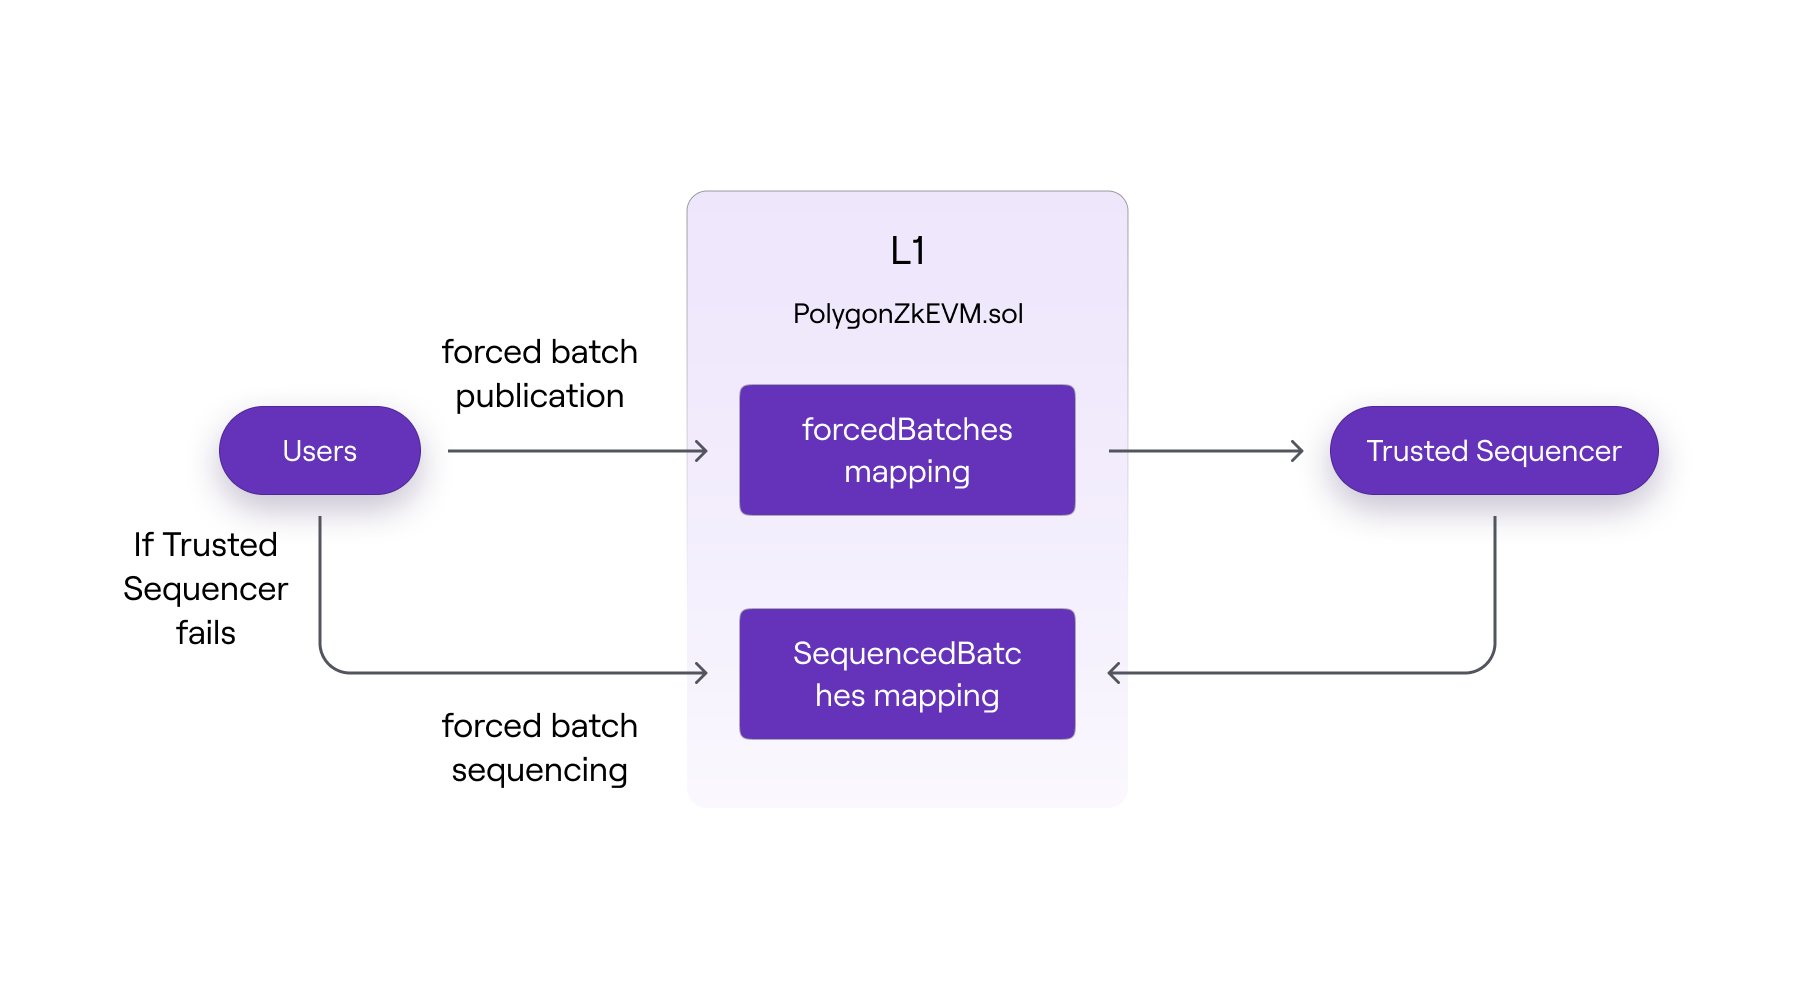 Forced batch sequencing flow